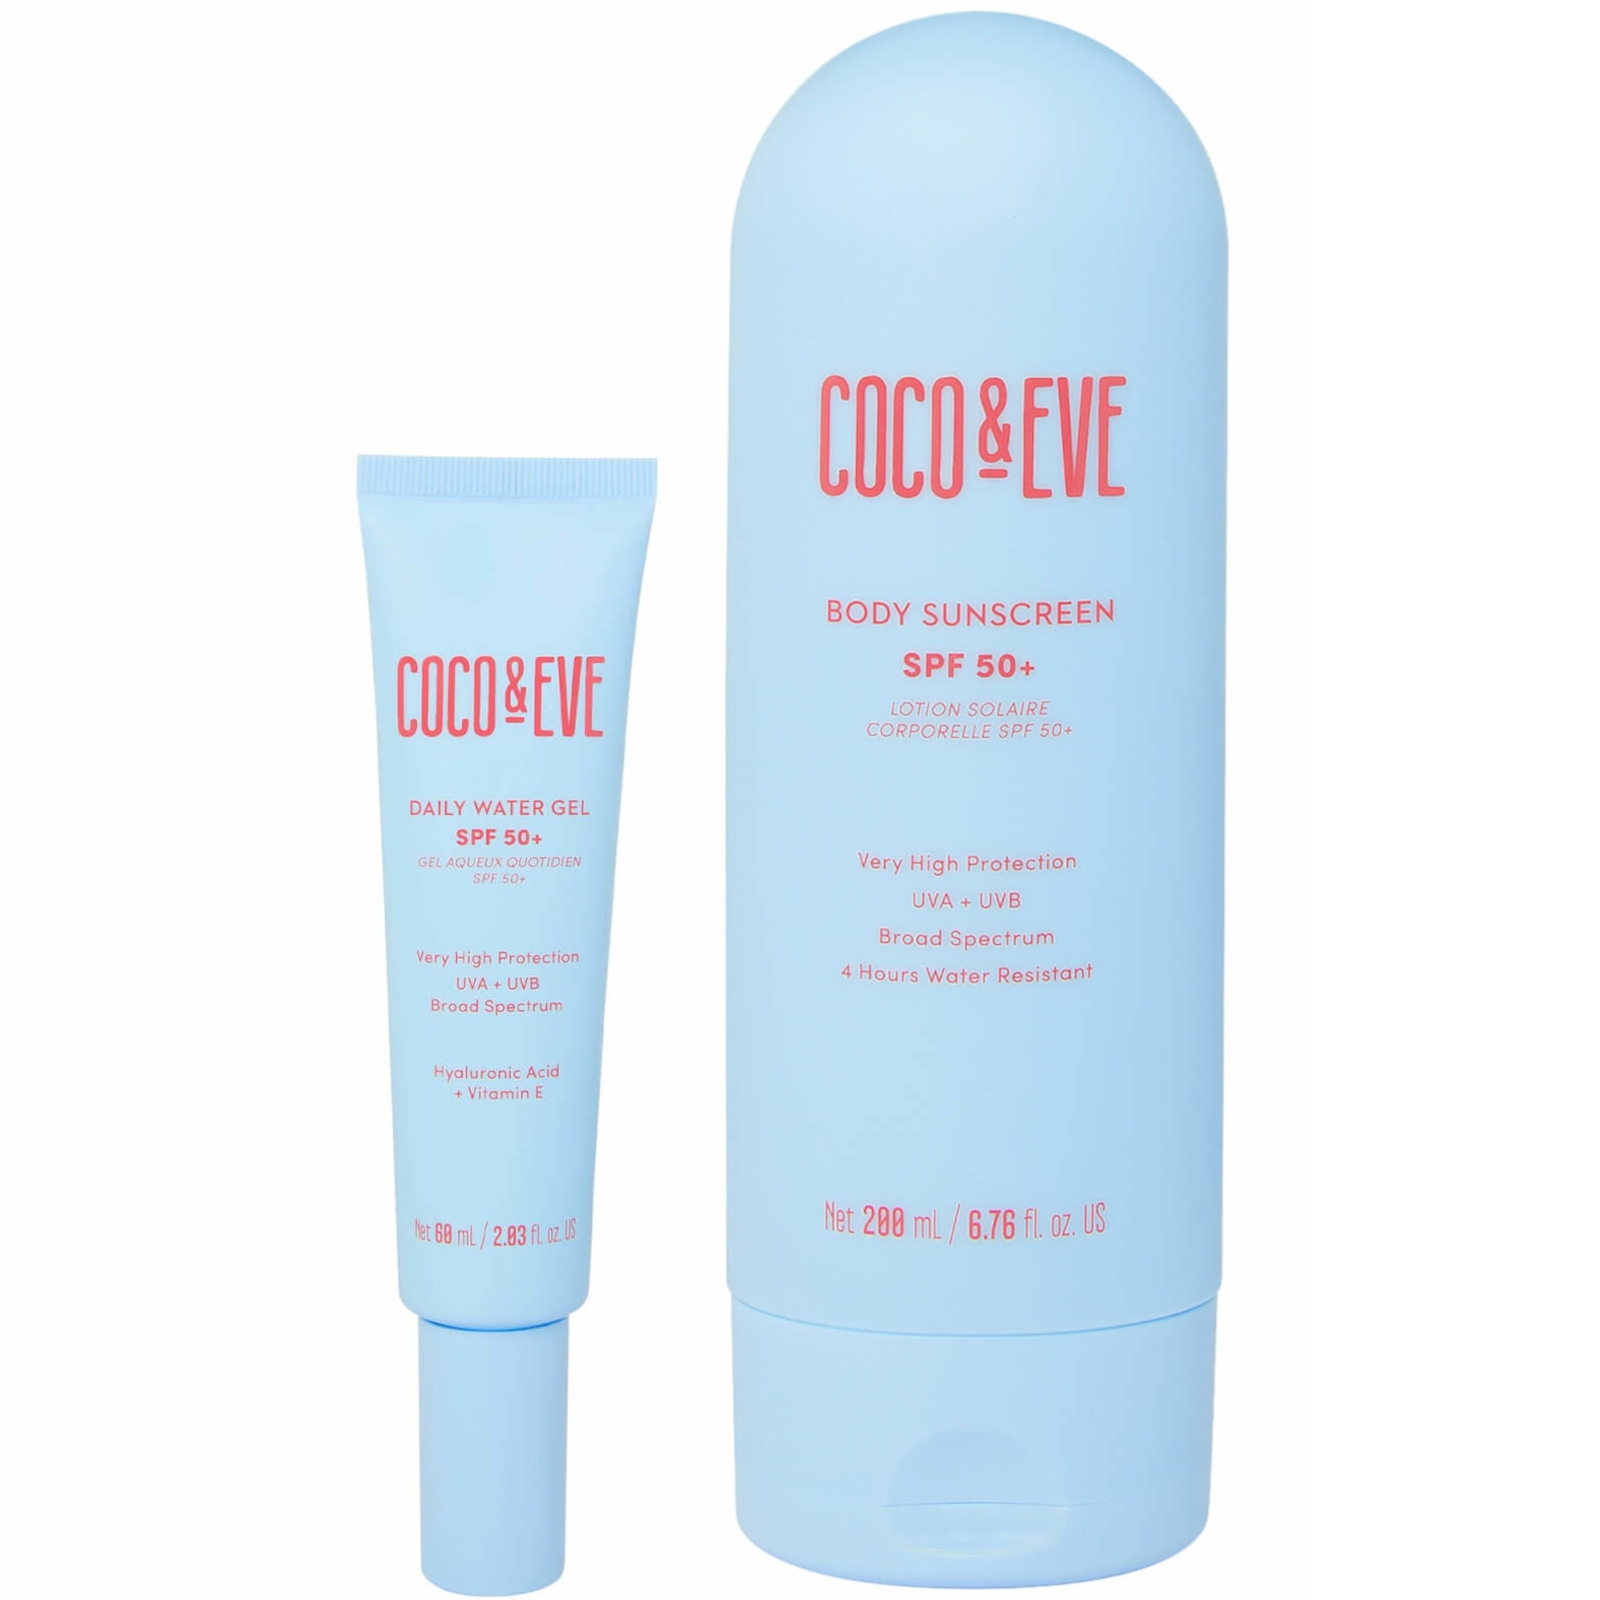 Coco & Eve Face and Body SPF Bundle